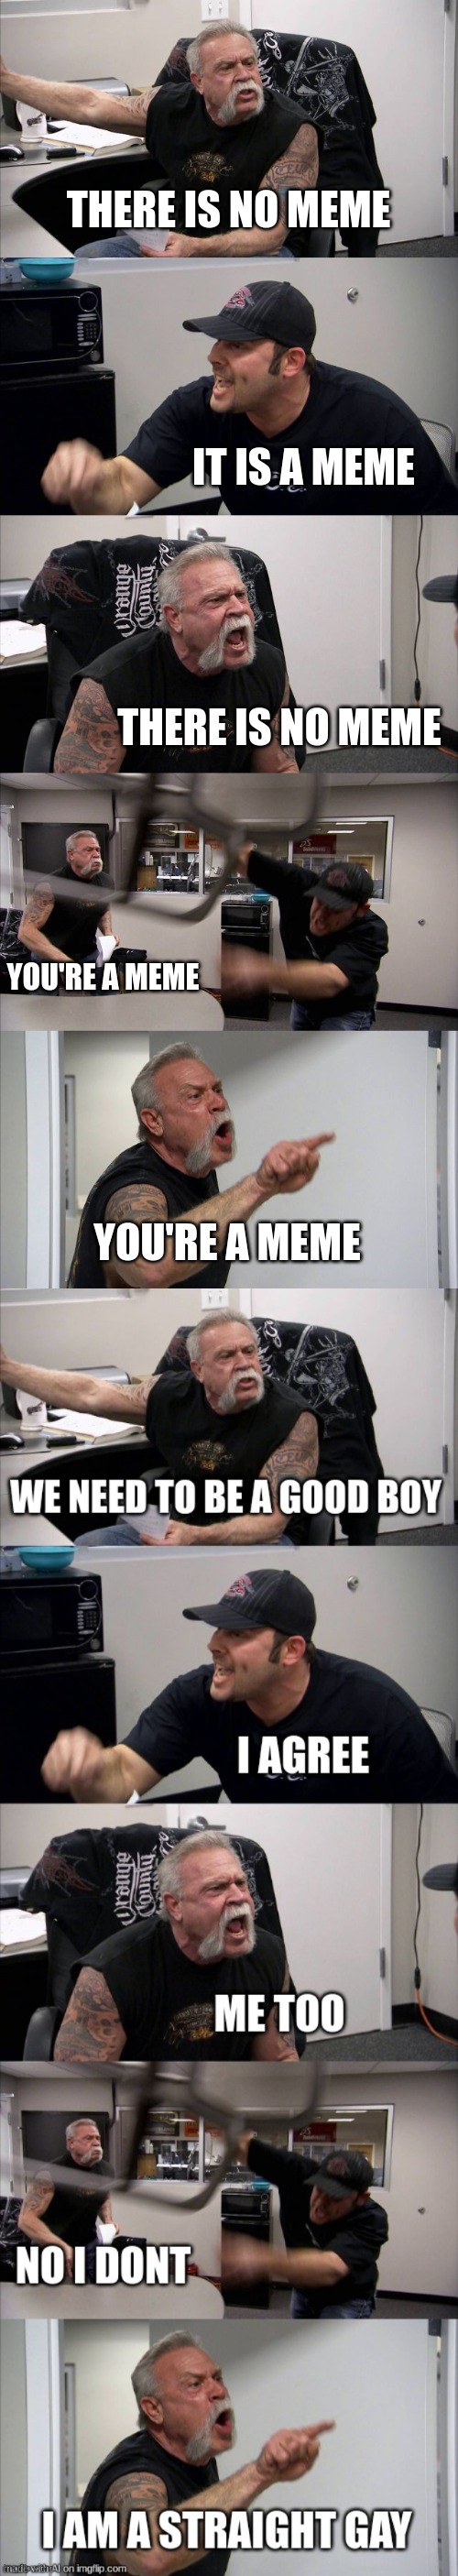 yey ai made meme | THERE IS NO MEME; IT IS A MEME; THERE IS NO MEME; YOU'RE A MEME; YOU'RE A MEME | image tagged in memes,american chopper argument | made w/ Imgflip meme maker